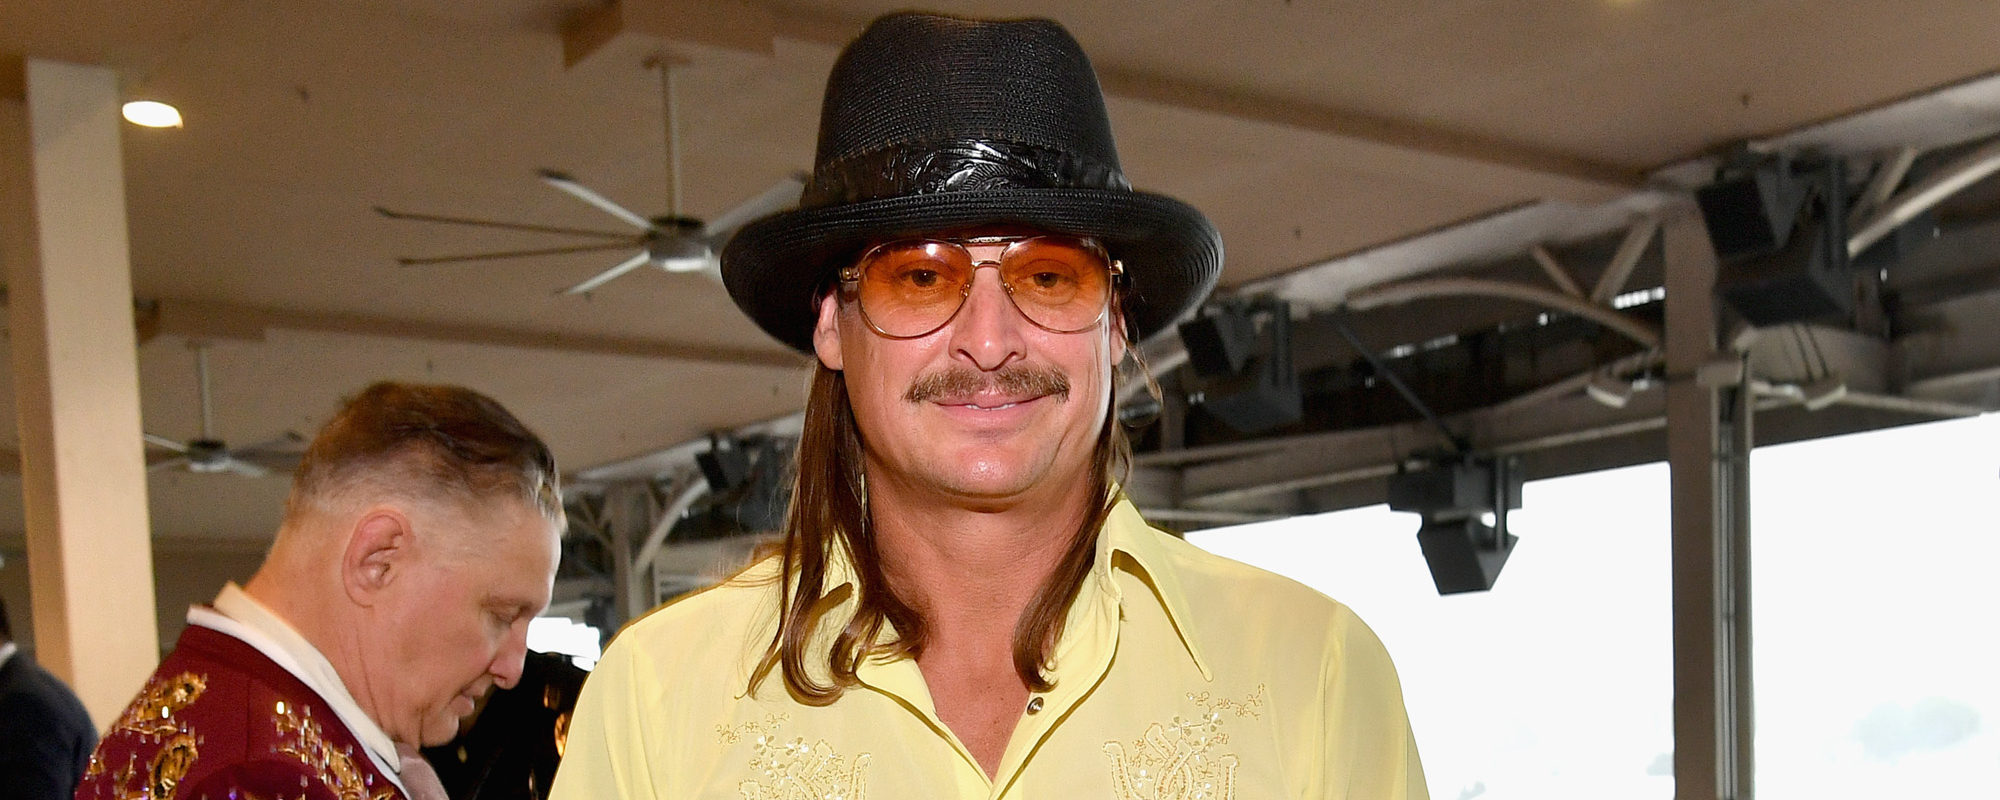 Kid Rock Dedicates Song to Late Father After His Death: “I Love You Pop!”